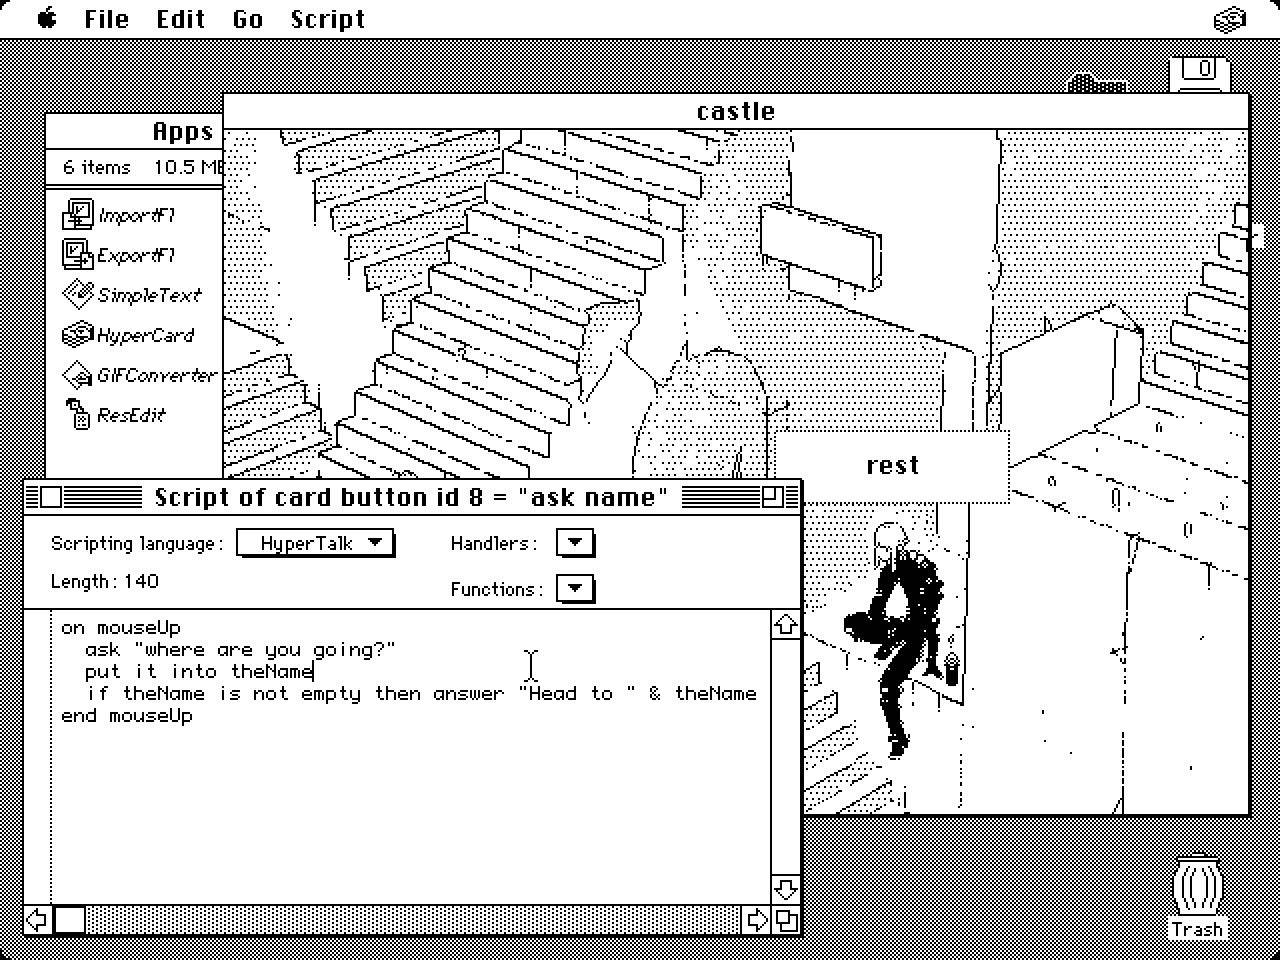 The scripting interface in HyperCard